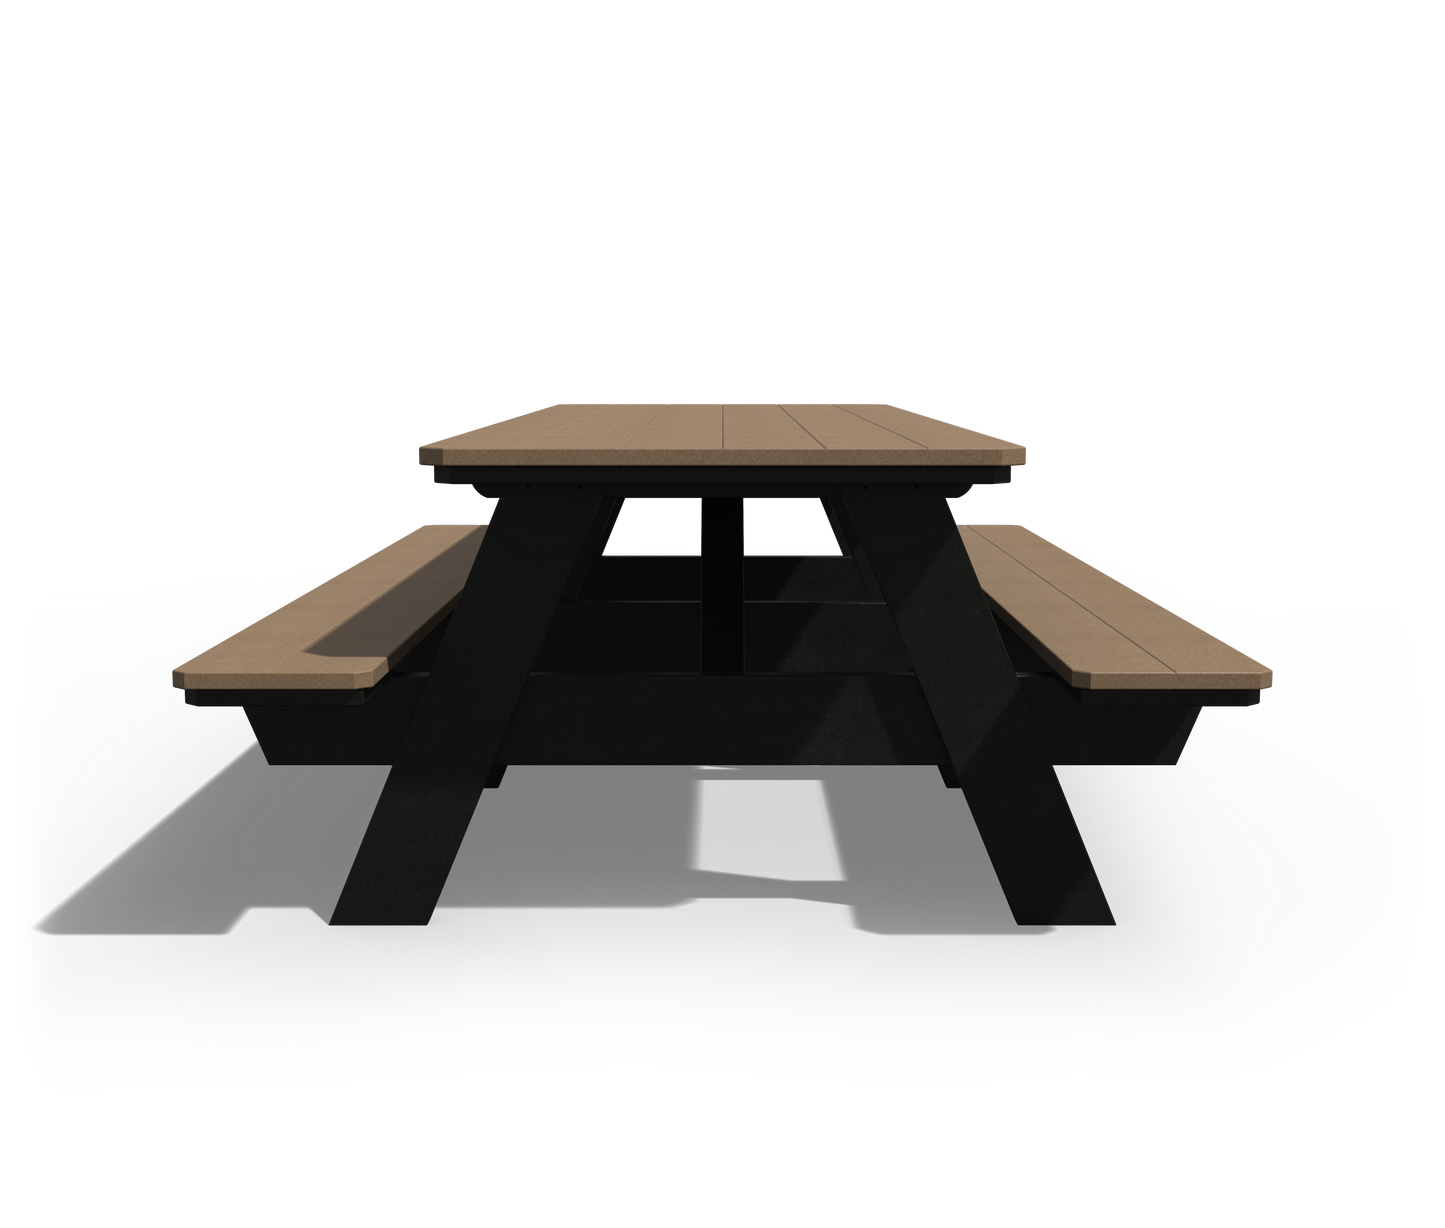 Patiova Recycled Plastic 3'x8' Picnic Table with Seats Attached - LEAD TIME TO SHIP 3 WEEKS